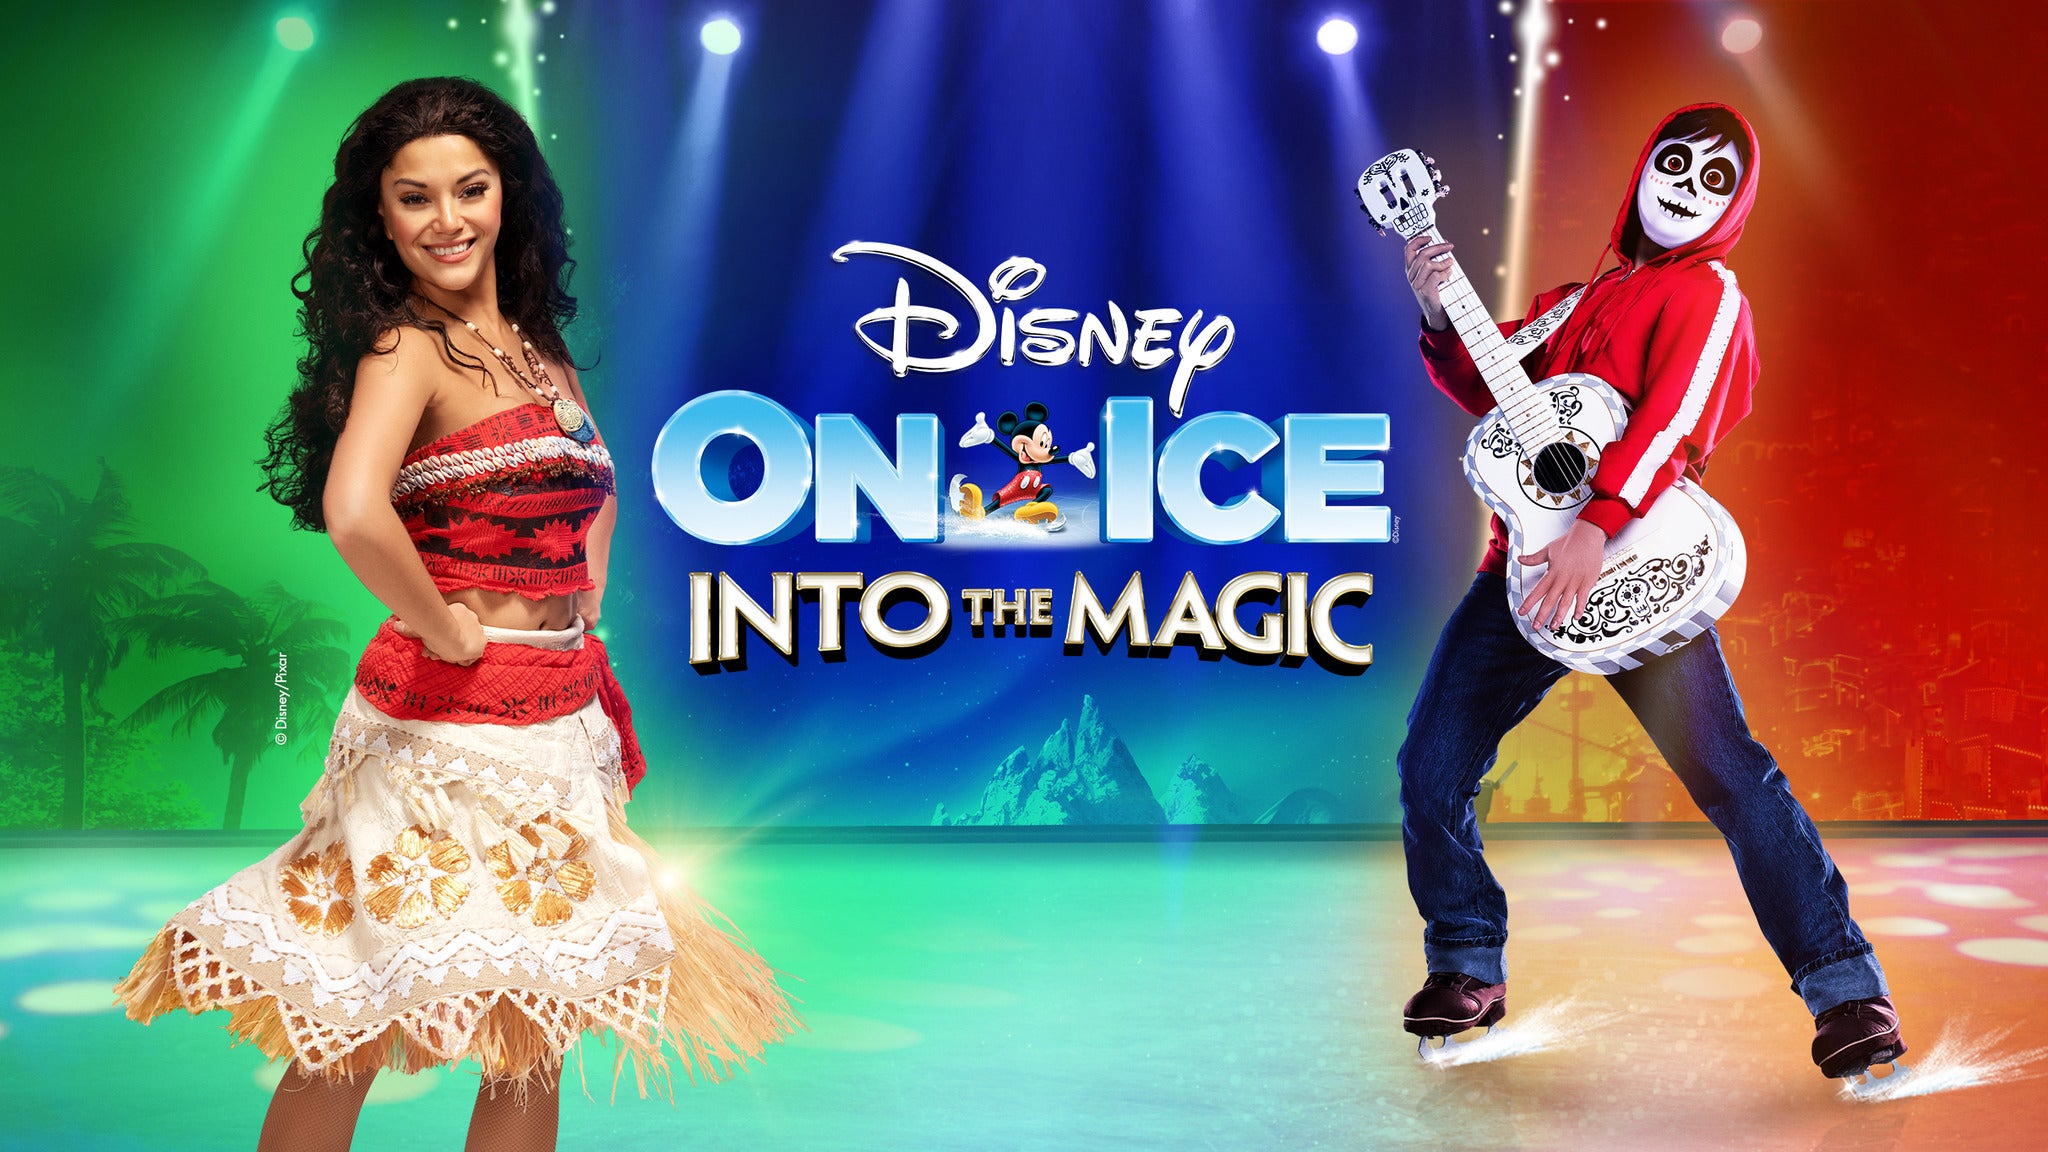 Disney On Ice presents Into the Magic Tickets | Event Dates & Schedule | Ticketmaster.com